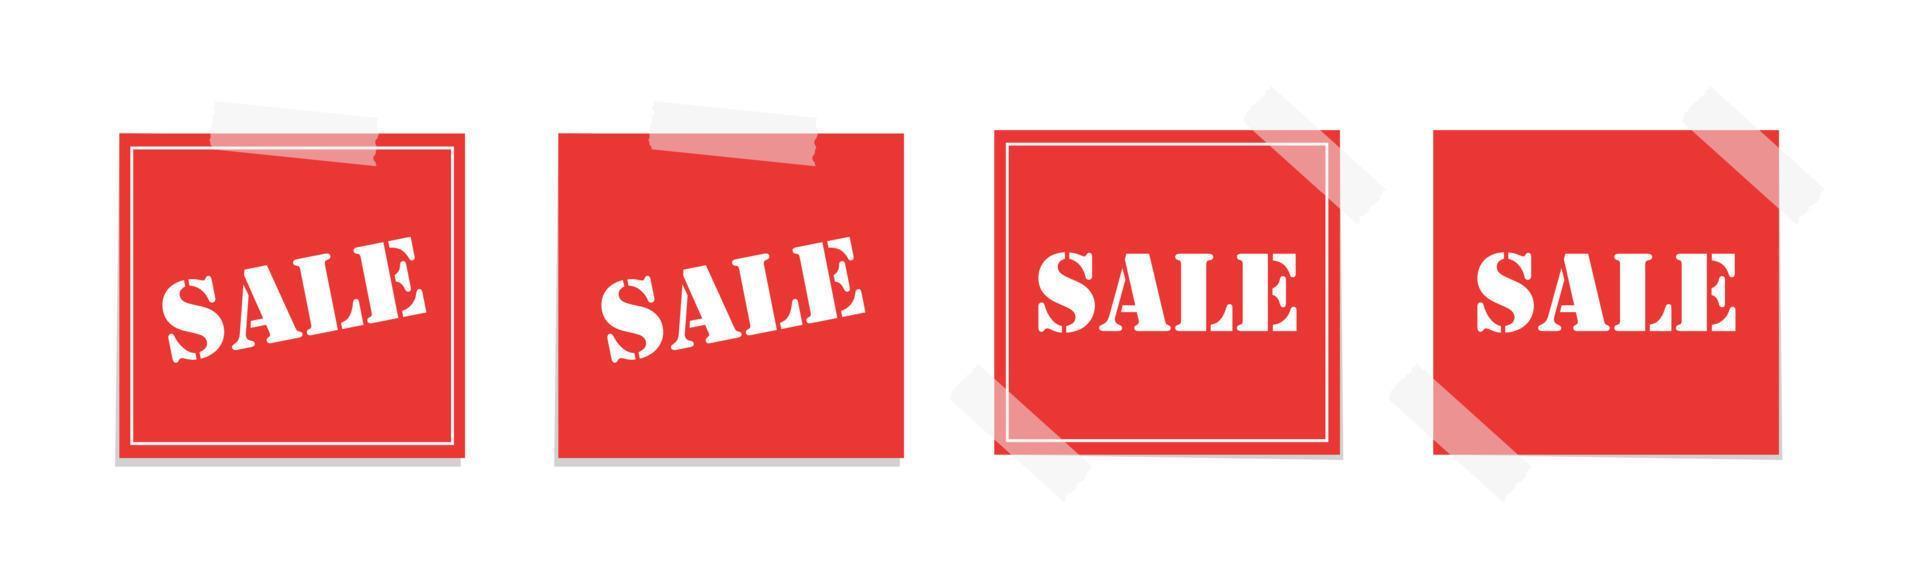 Red sale tags vector illustration set. Taped square sale paper note memo. Price and discount label stickers.